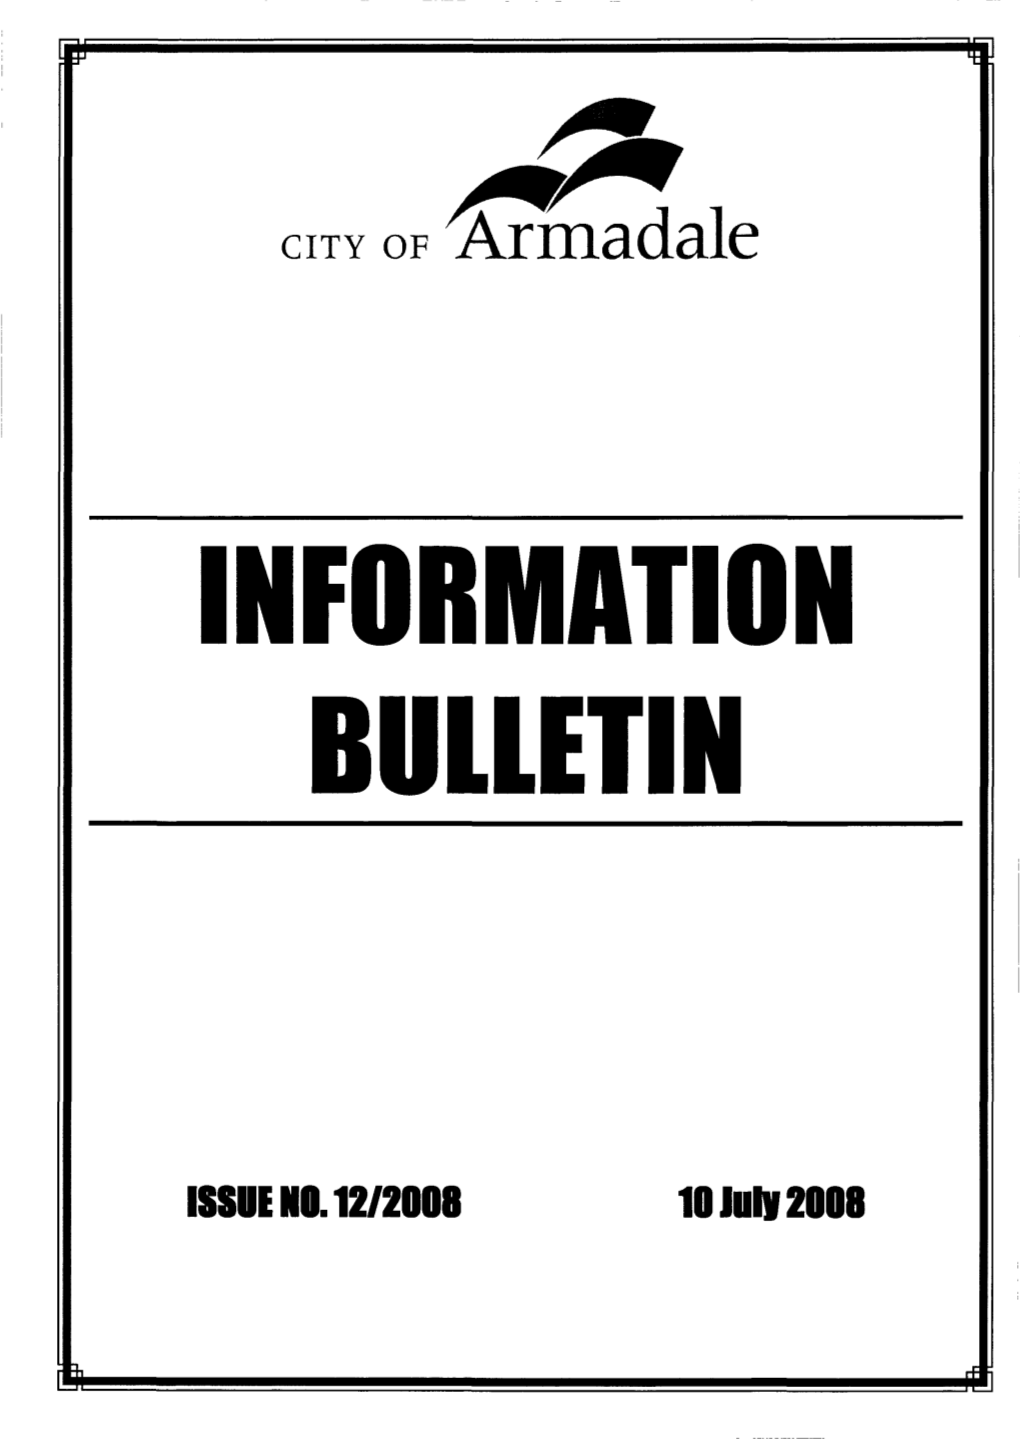 Issue No. 12/2008 Bulletin